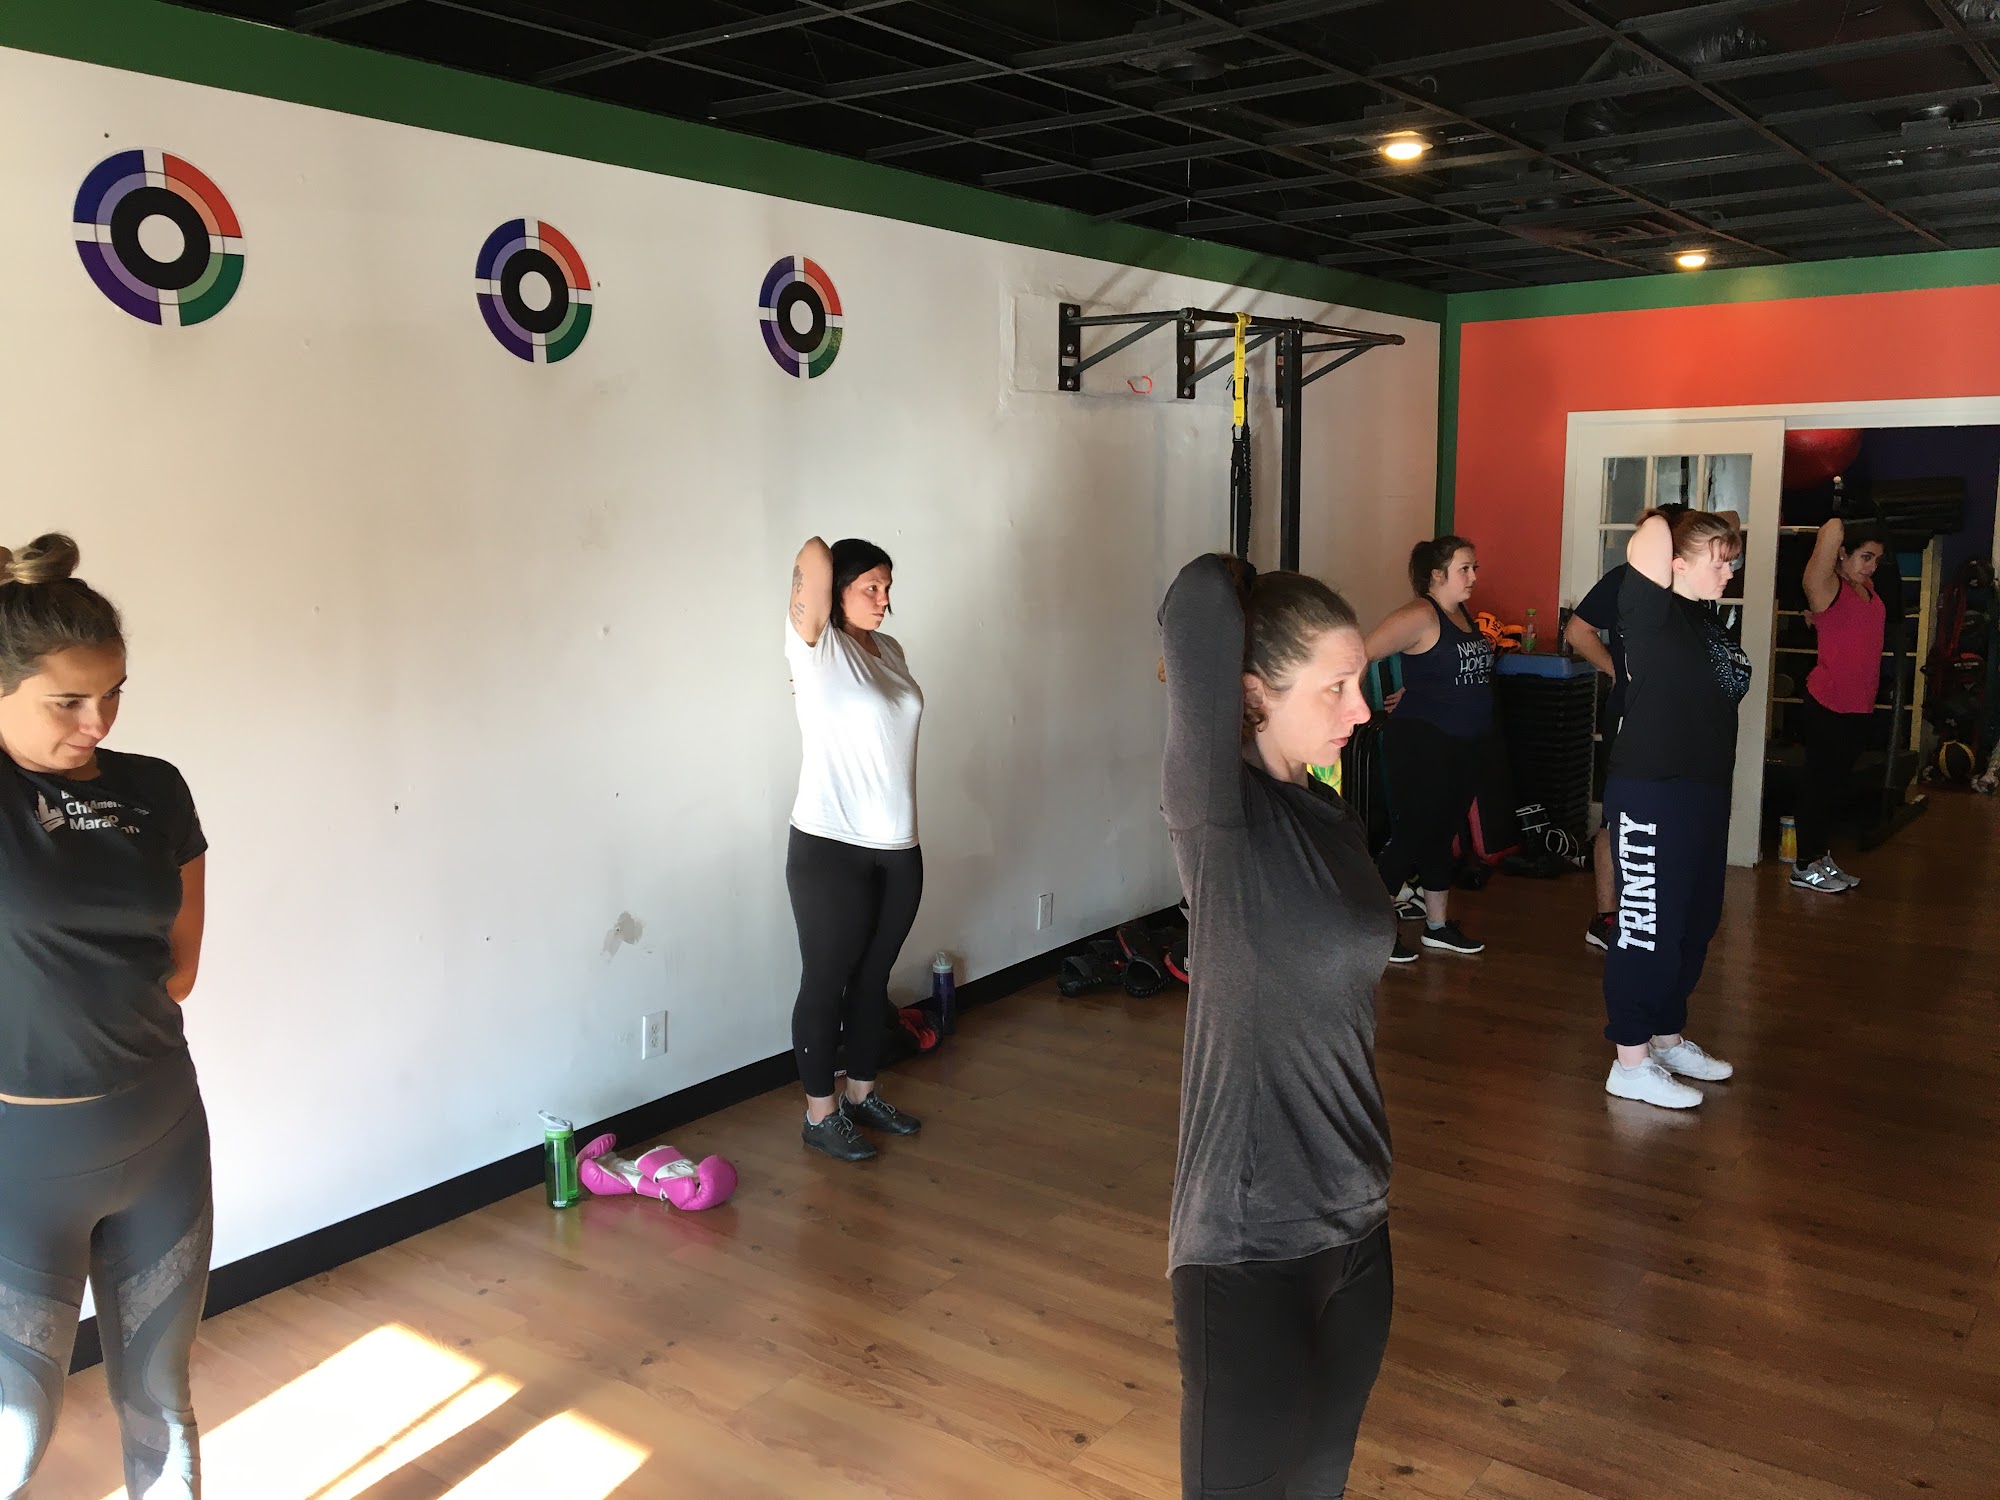 Core Strength Personal Training 7223 Madison St, Forest Park Illinois 60130